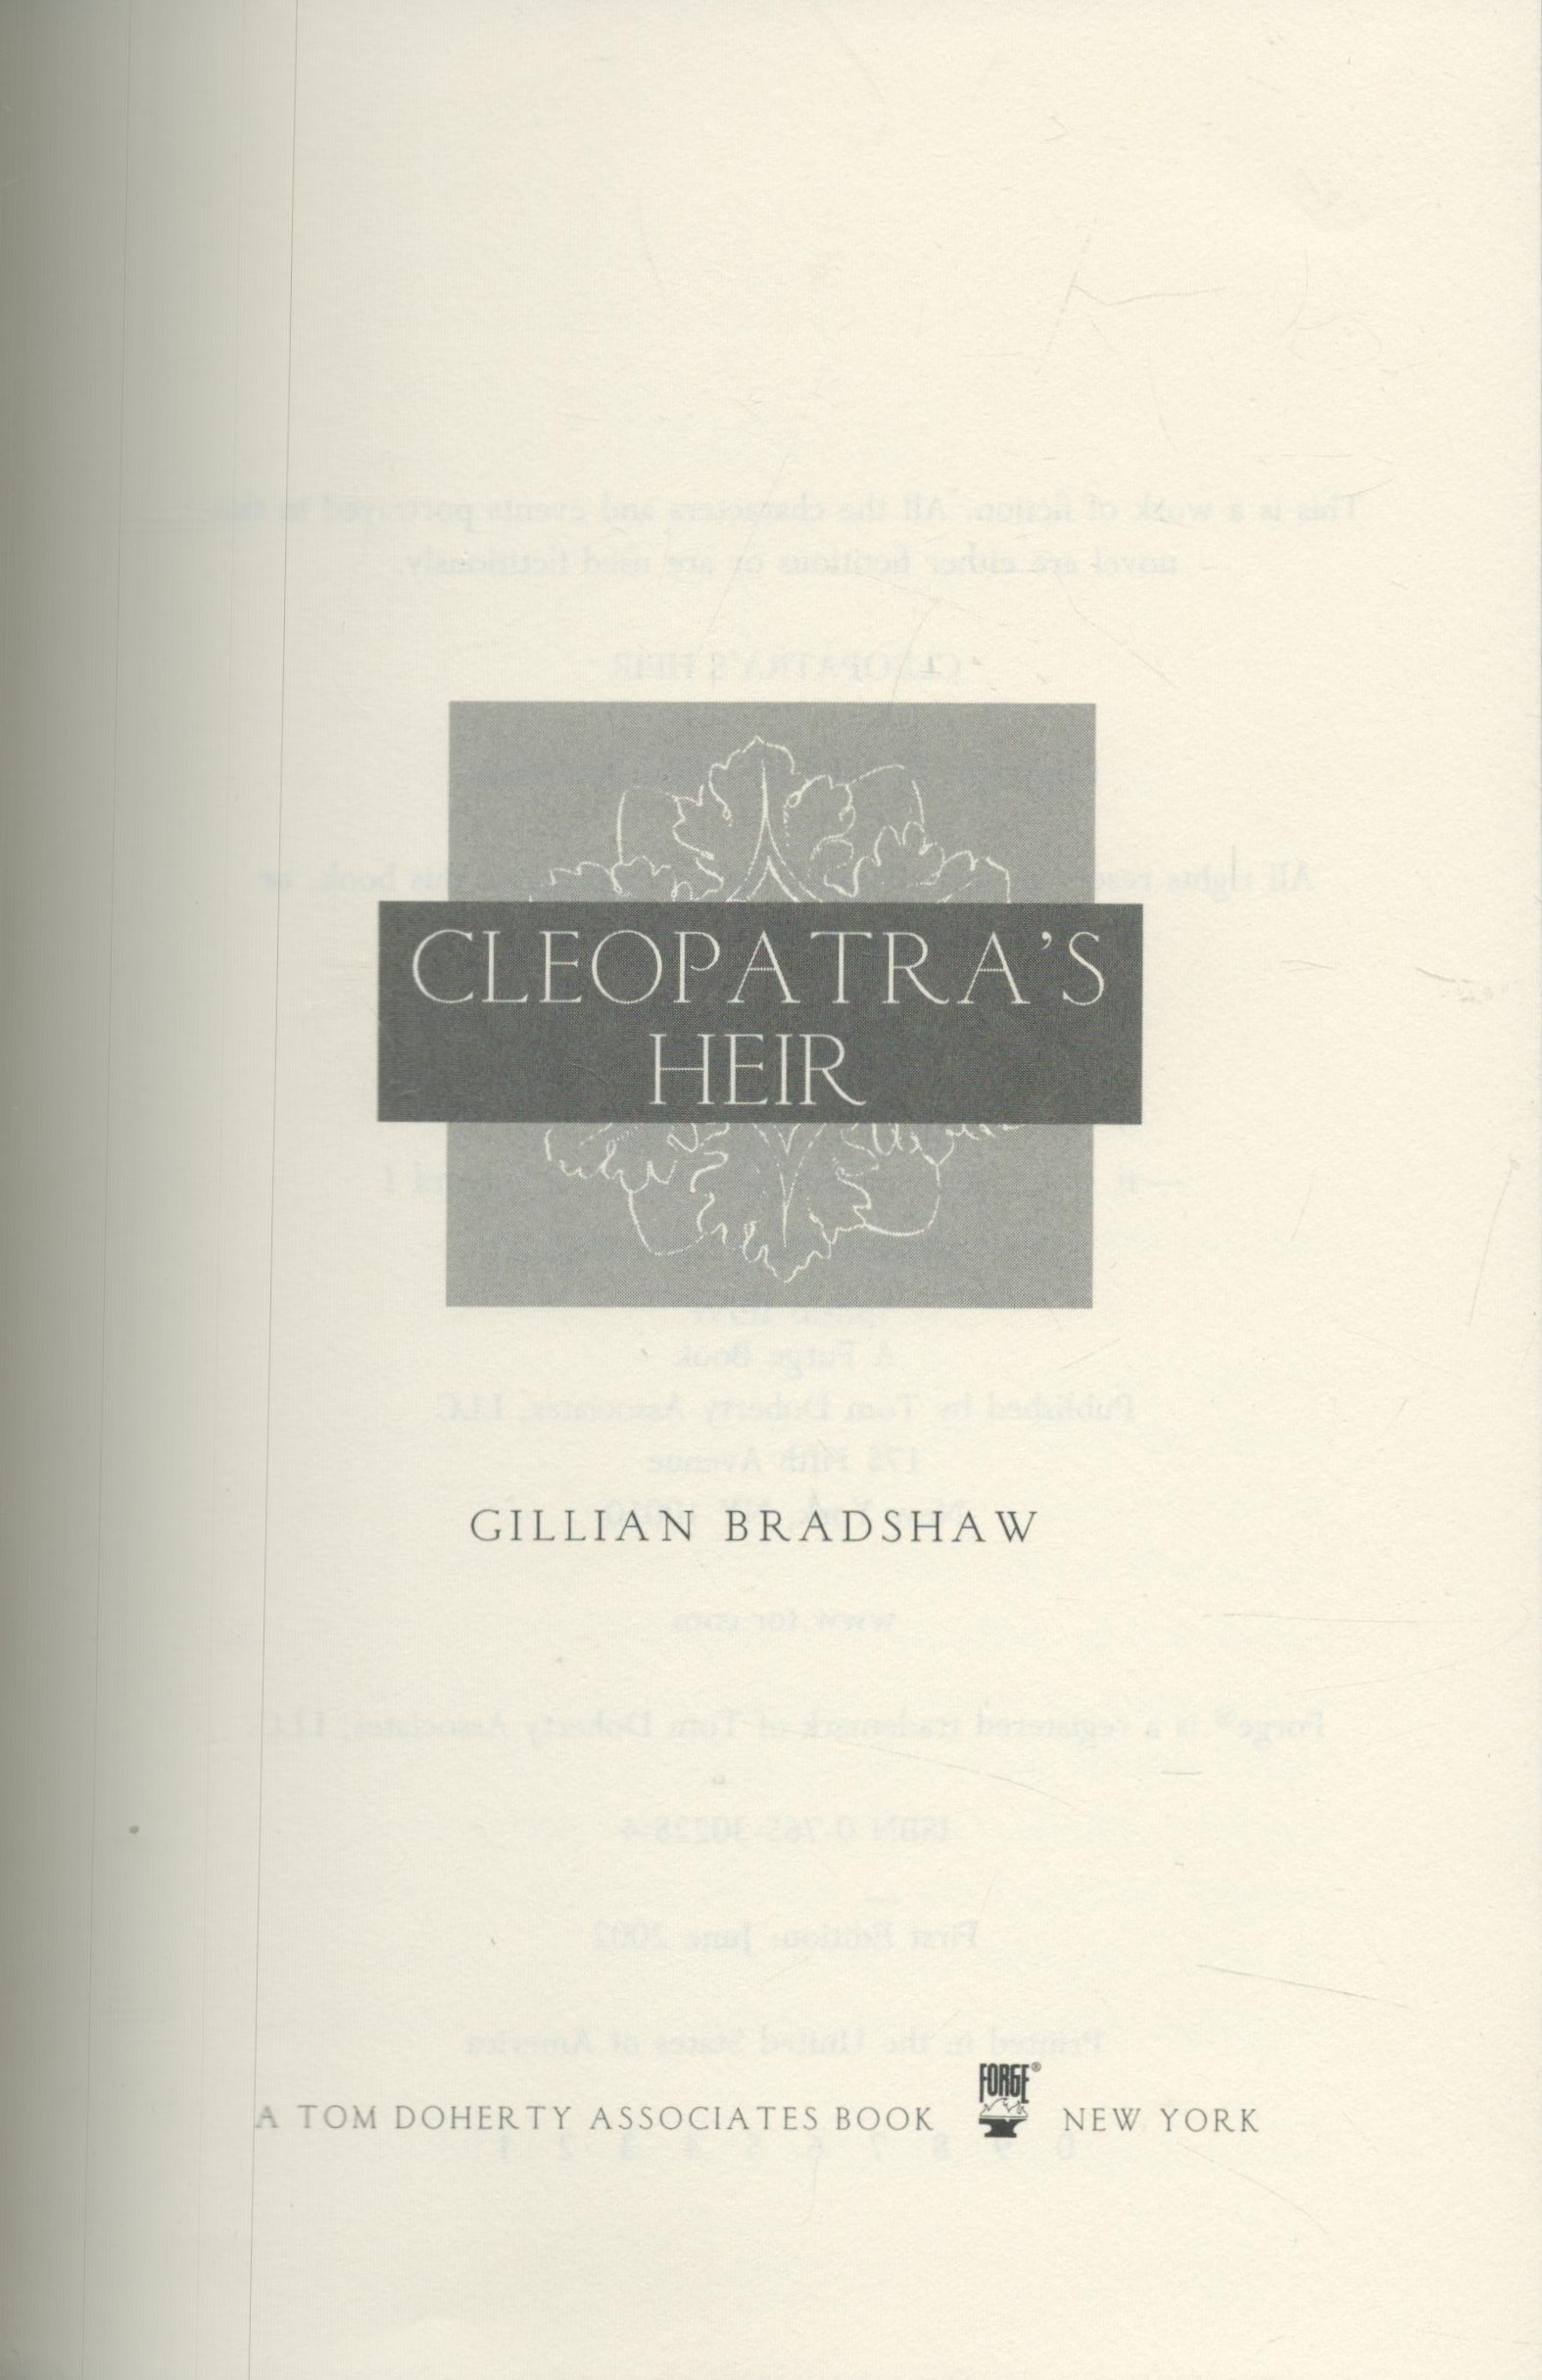 Gillian Bradshaw Cleopatra's Heir first edition hardback book. Good condition. All autographs are - Image 2 of 3